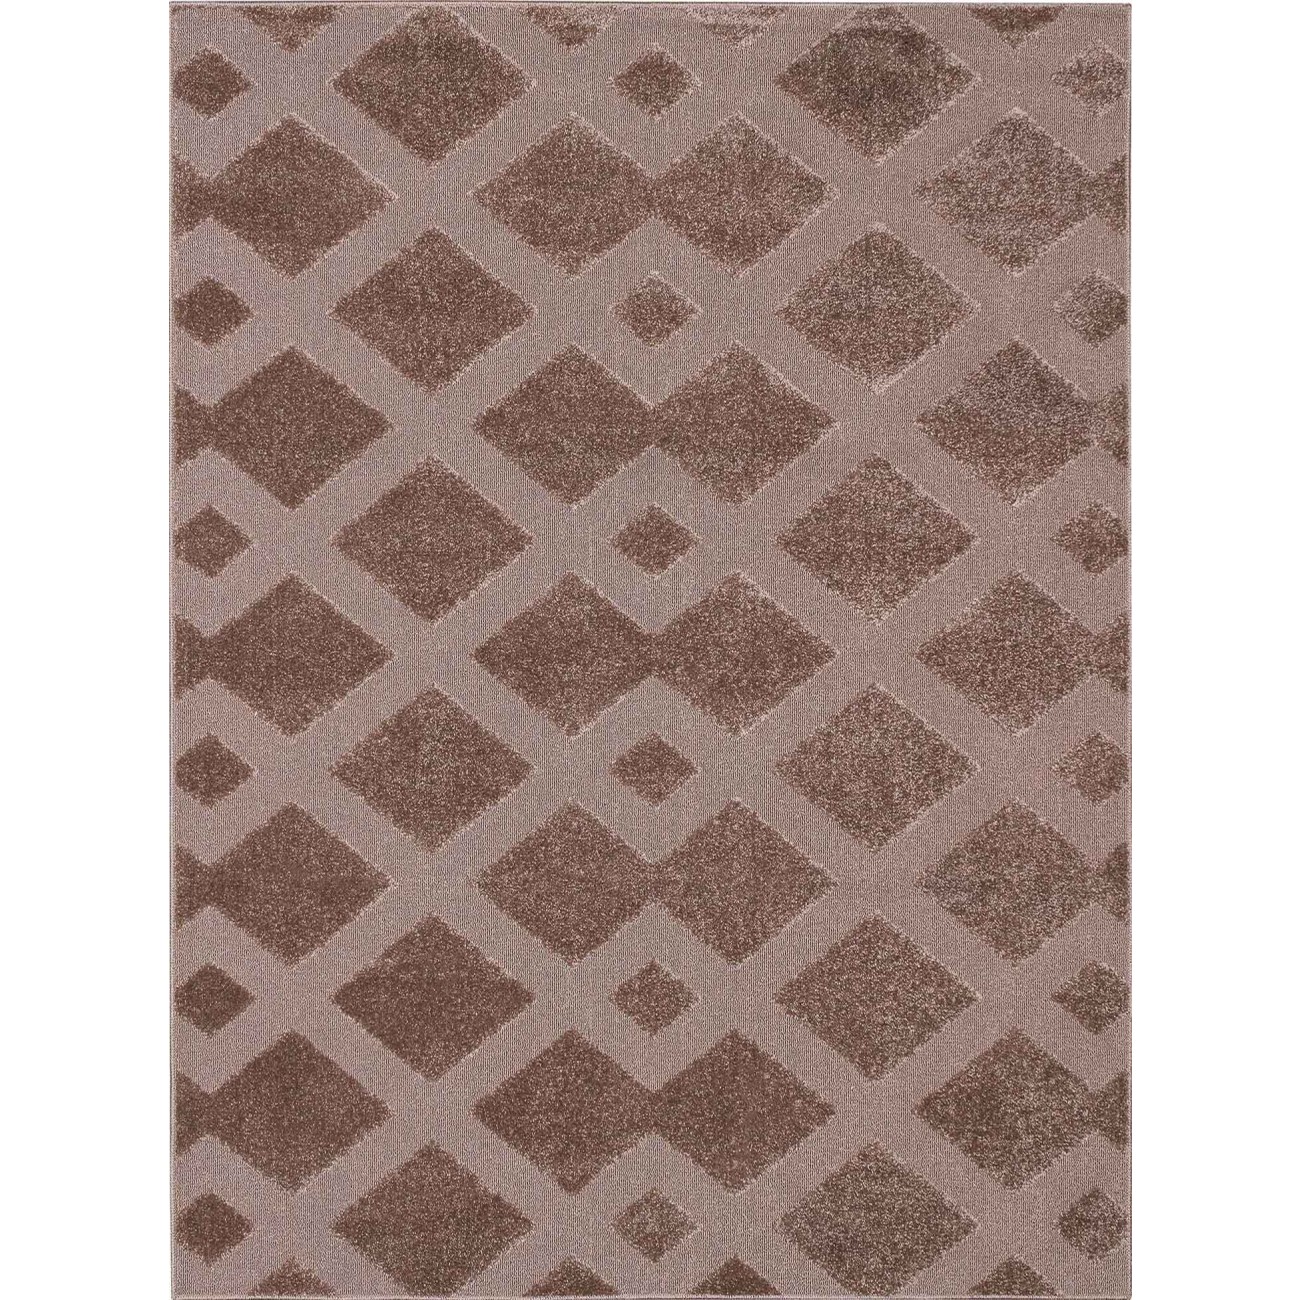 Tapete Realce Trilho Taupe - 100x150